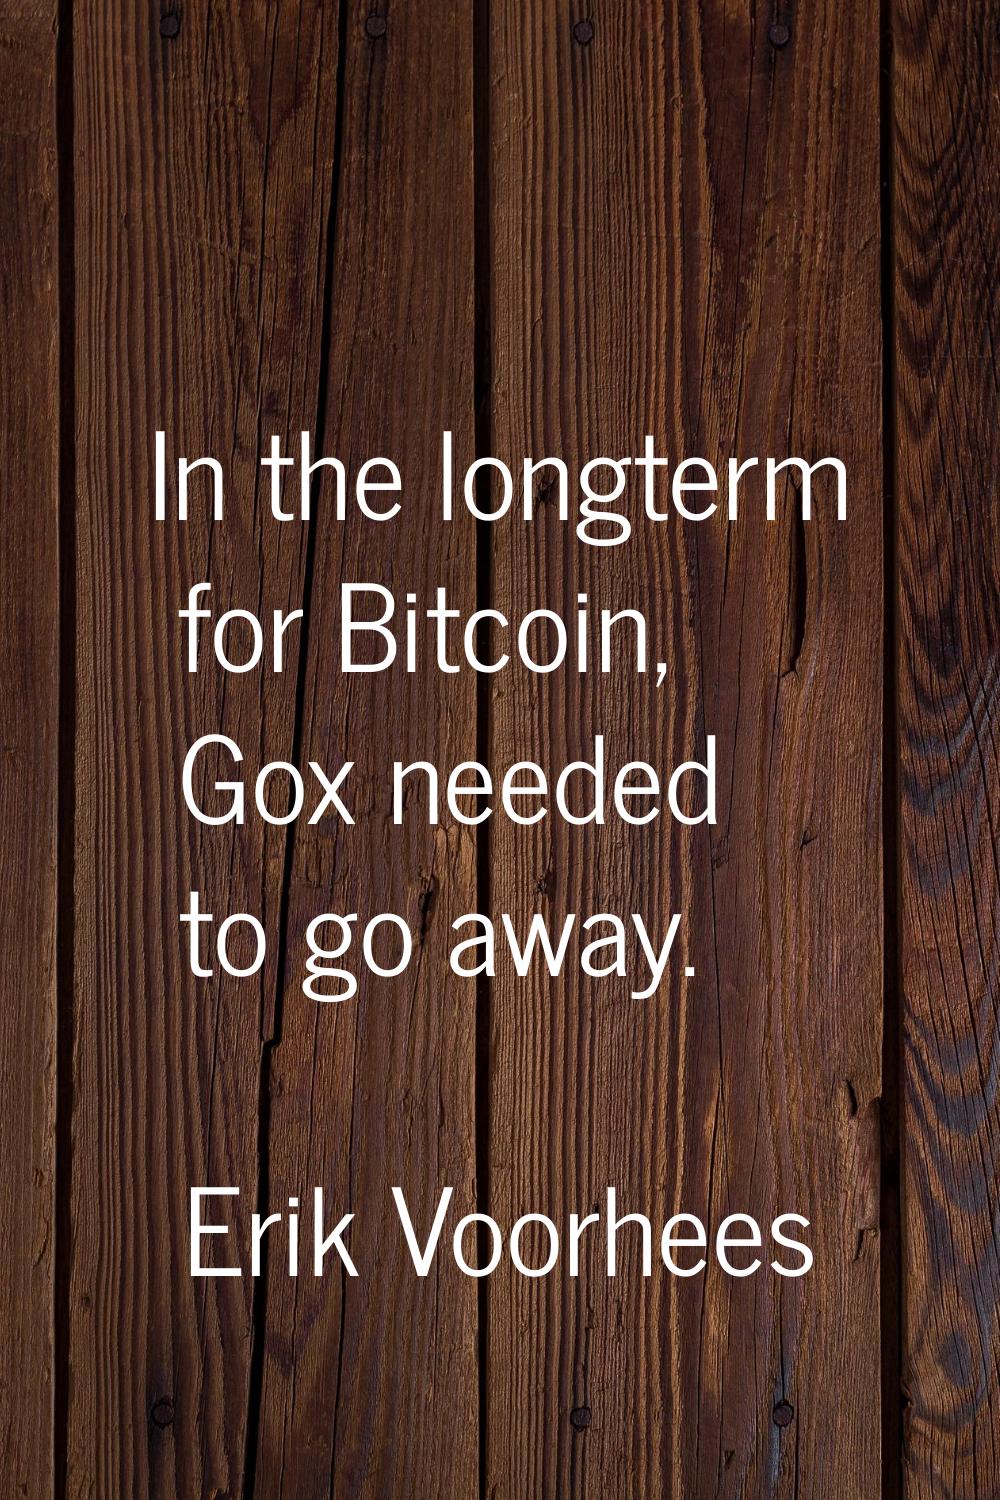 In the longterm for Bitcoin, Gox needed to go away.